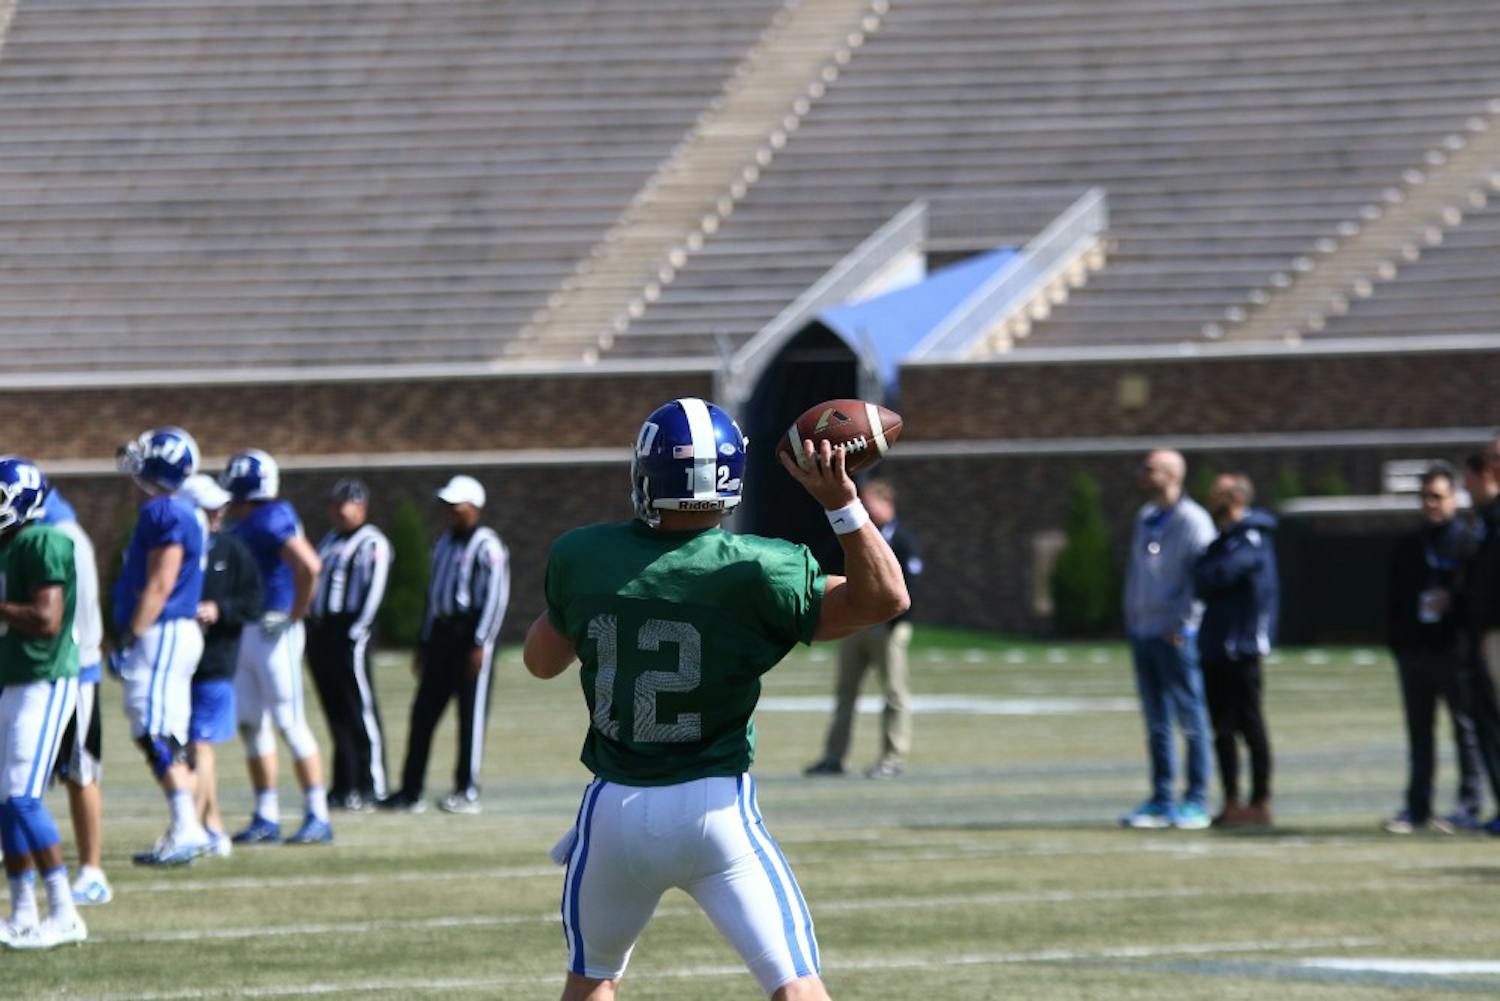 Parker Boehme&mdash;who took first-team reps during Duke's spring camp with starter Thomas Sirk sidelined&mdash;completed seven of 10 passes for 66 yards Saturday.